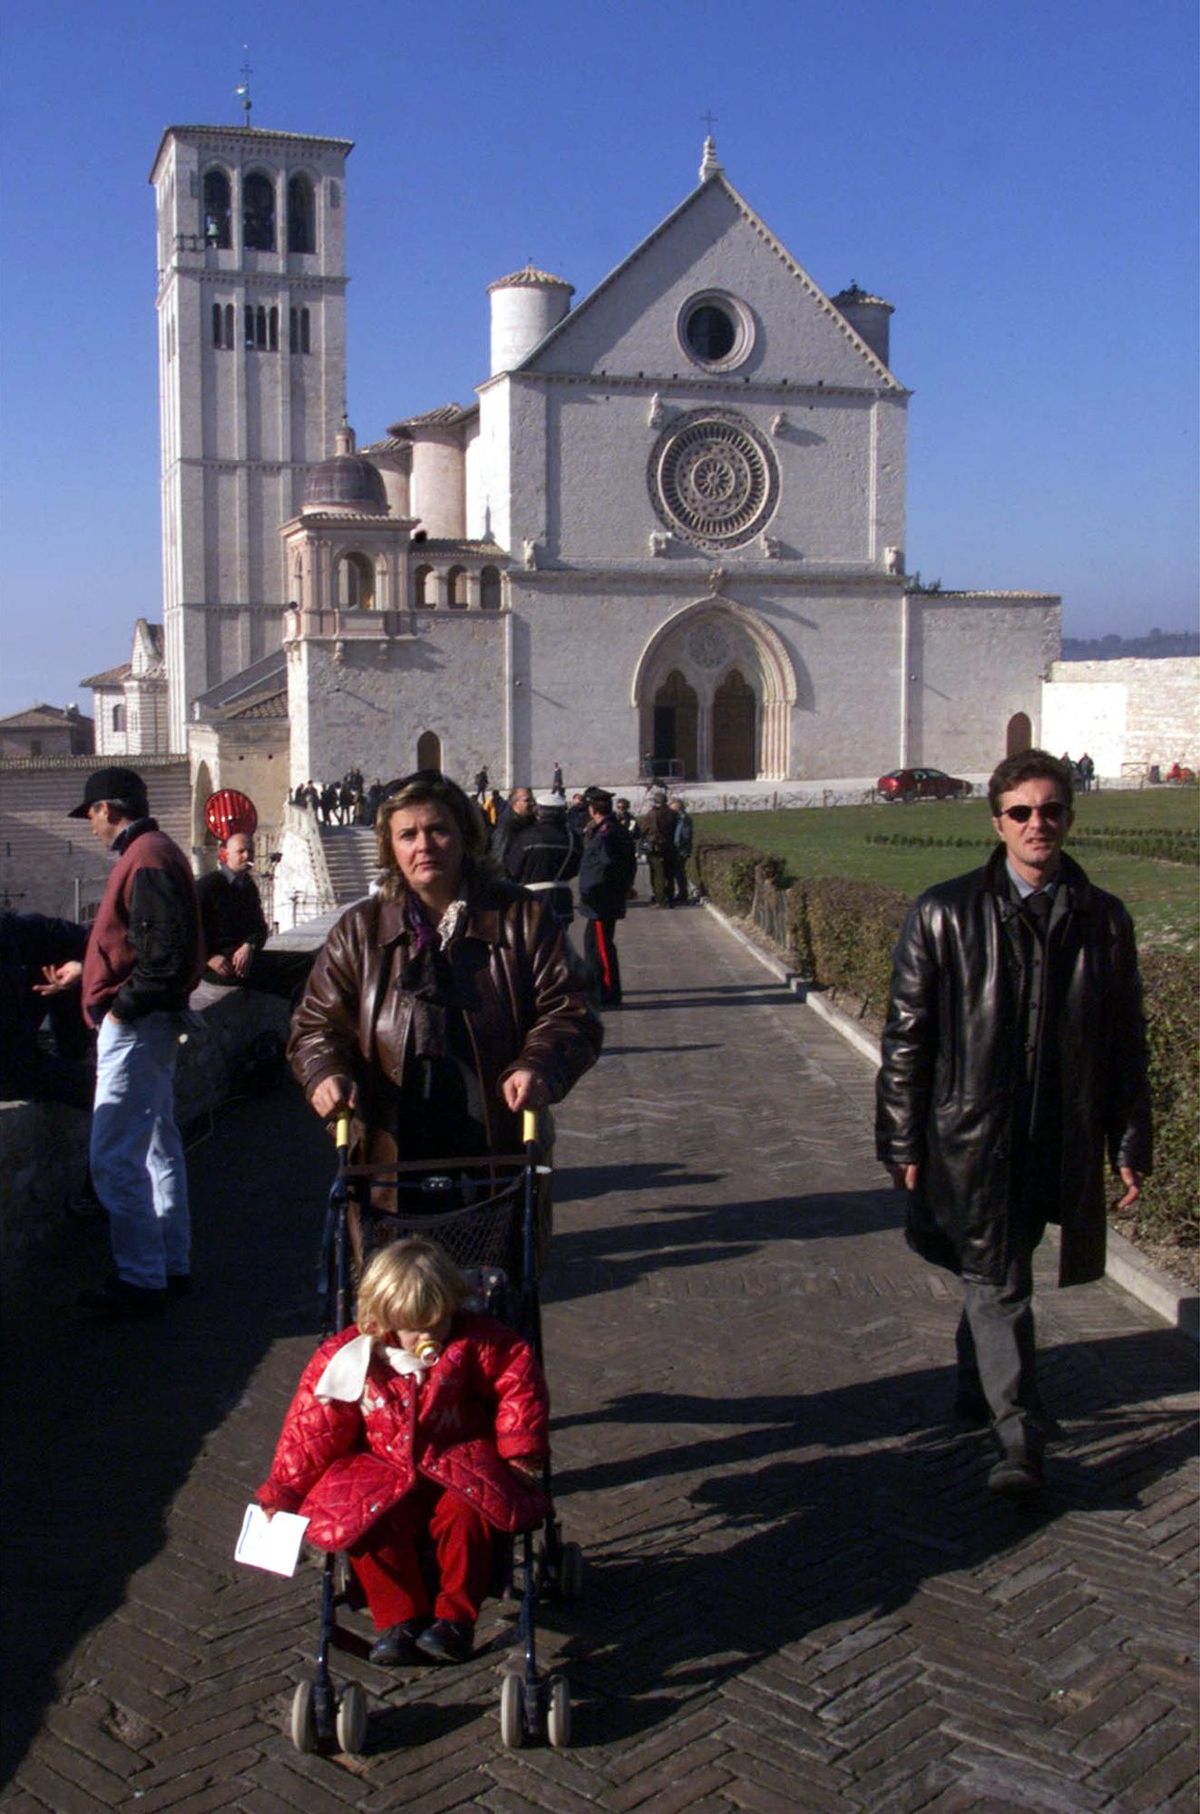 People walk on a sunny day in the area outside the Basilica of St. Francis of Assisi in this Nov.27, 1999 file photo. (PIER PAOLO CITO / AP)